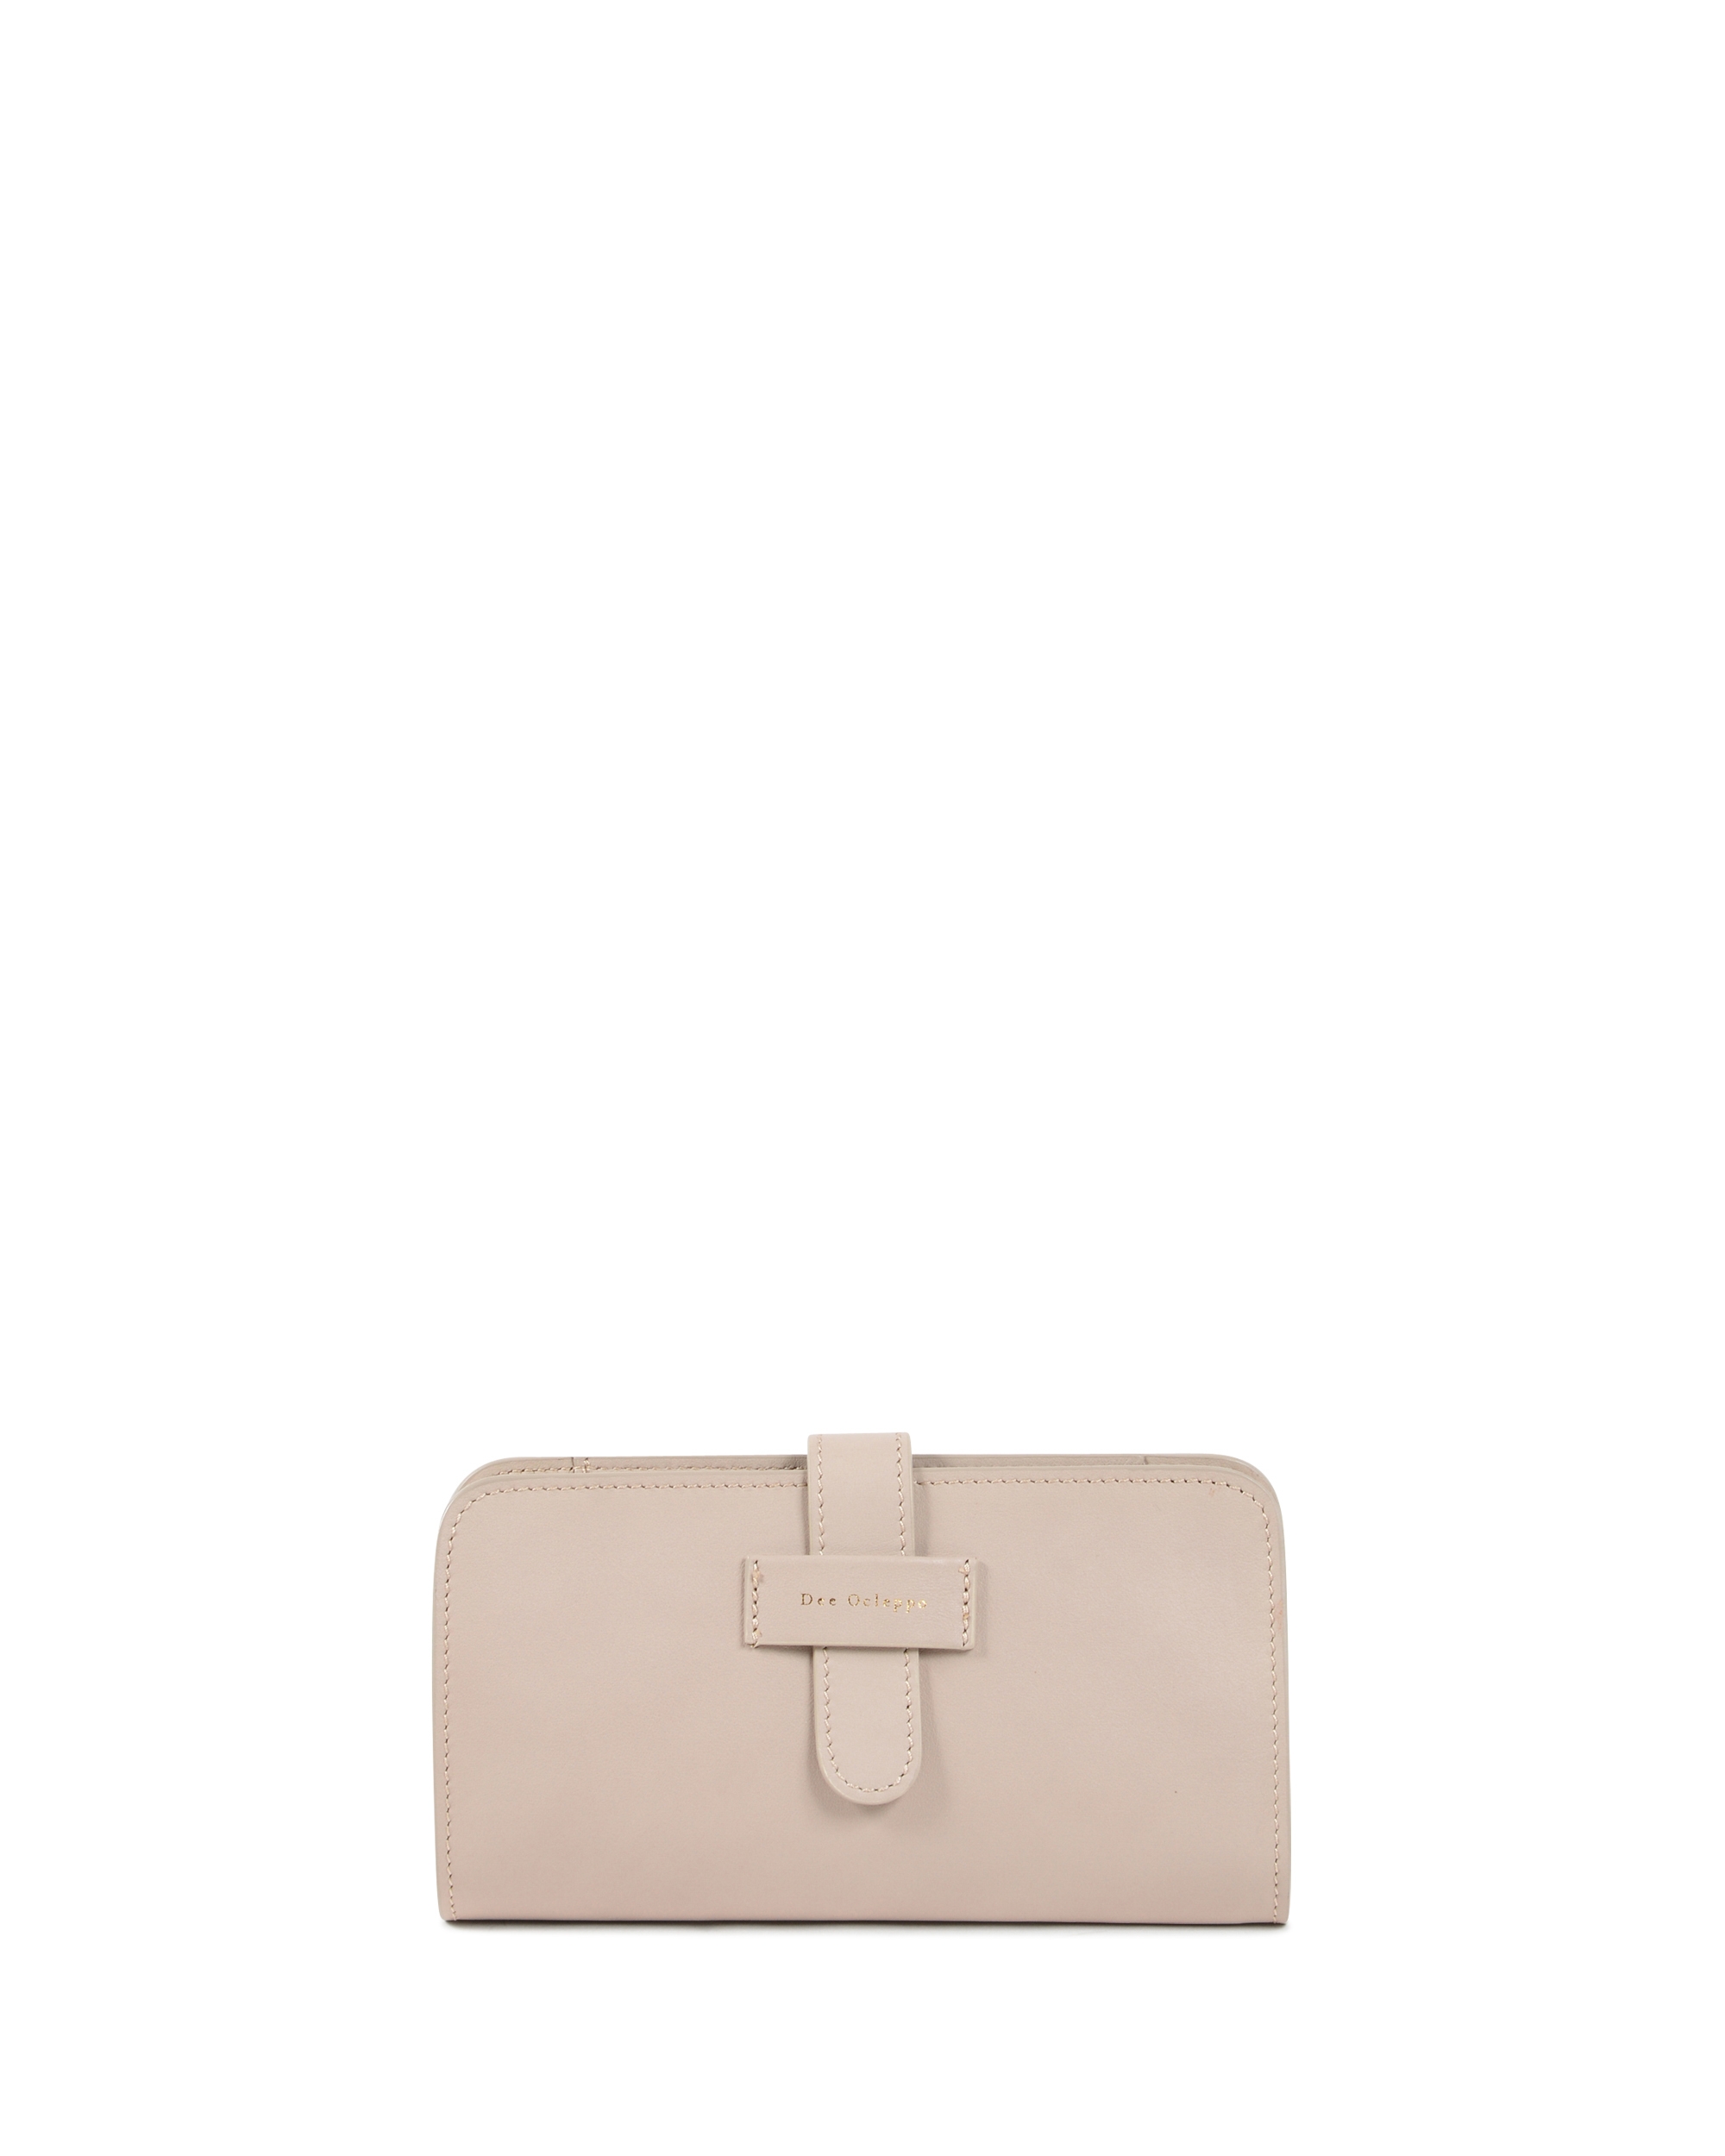 MB2522 WALLET SOFT TAUPE